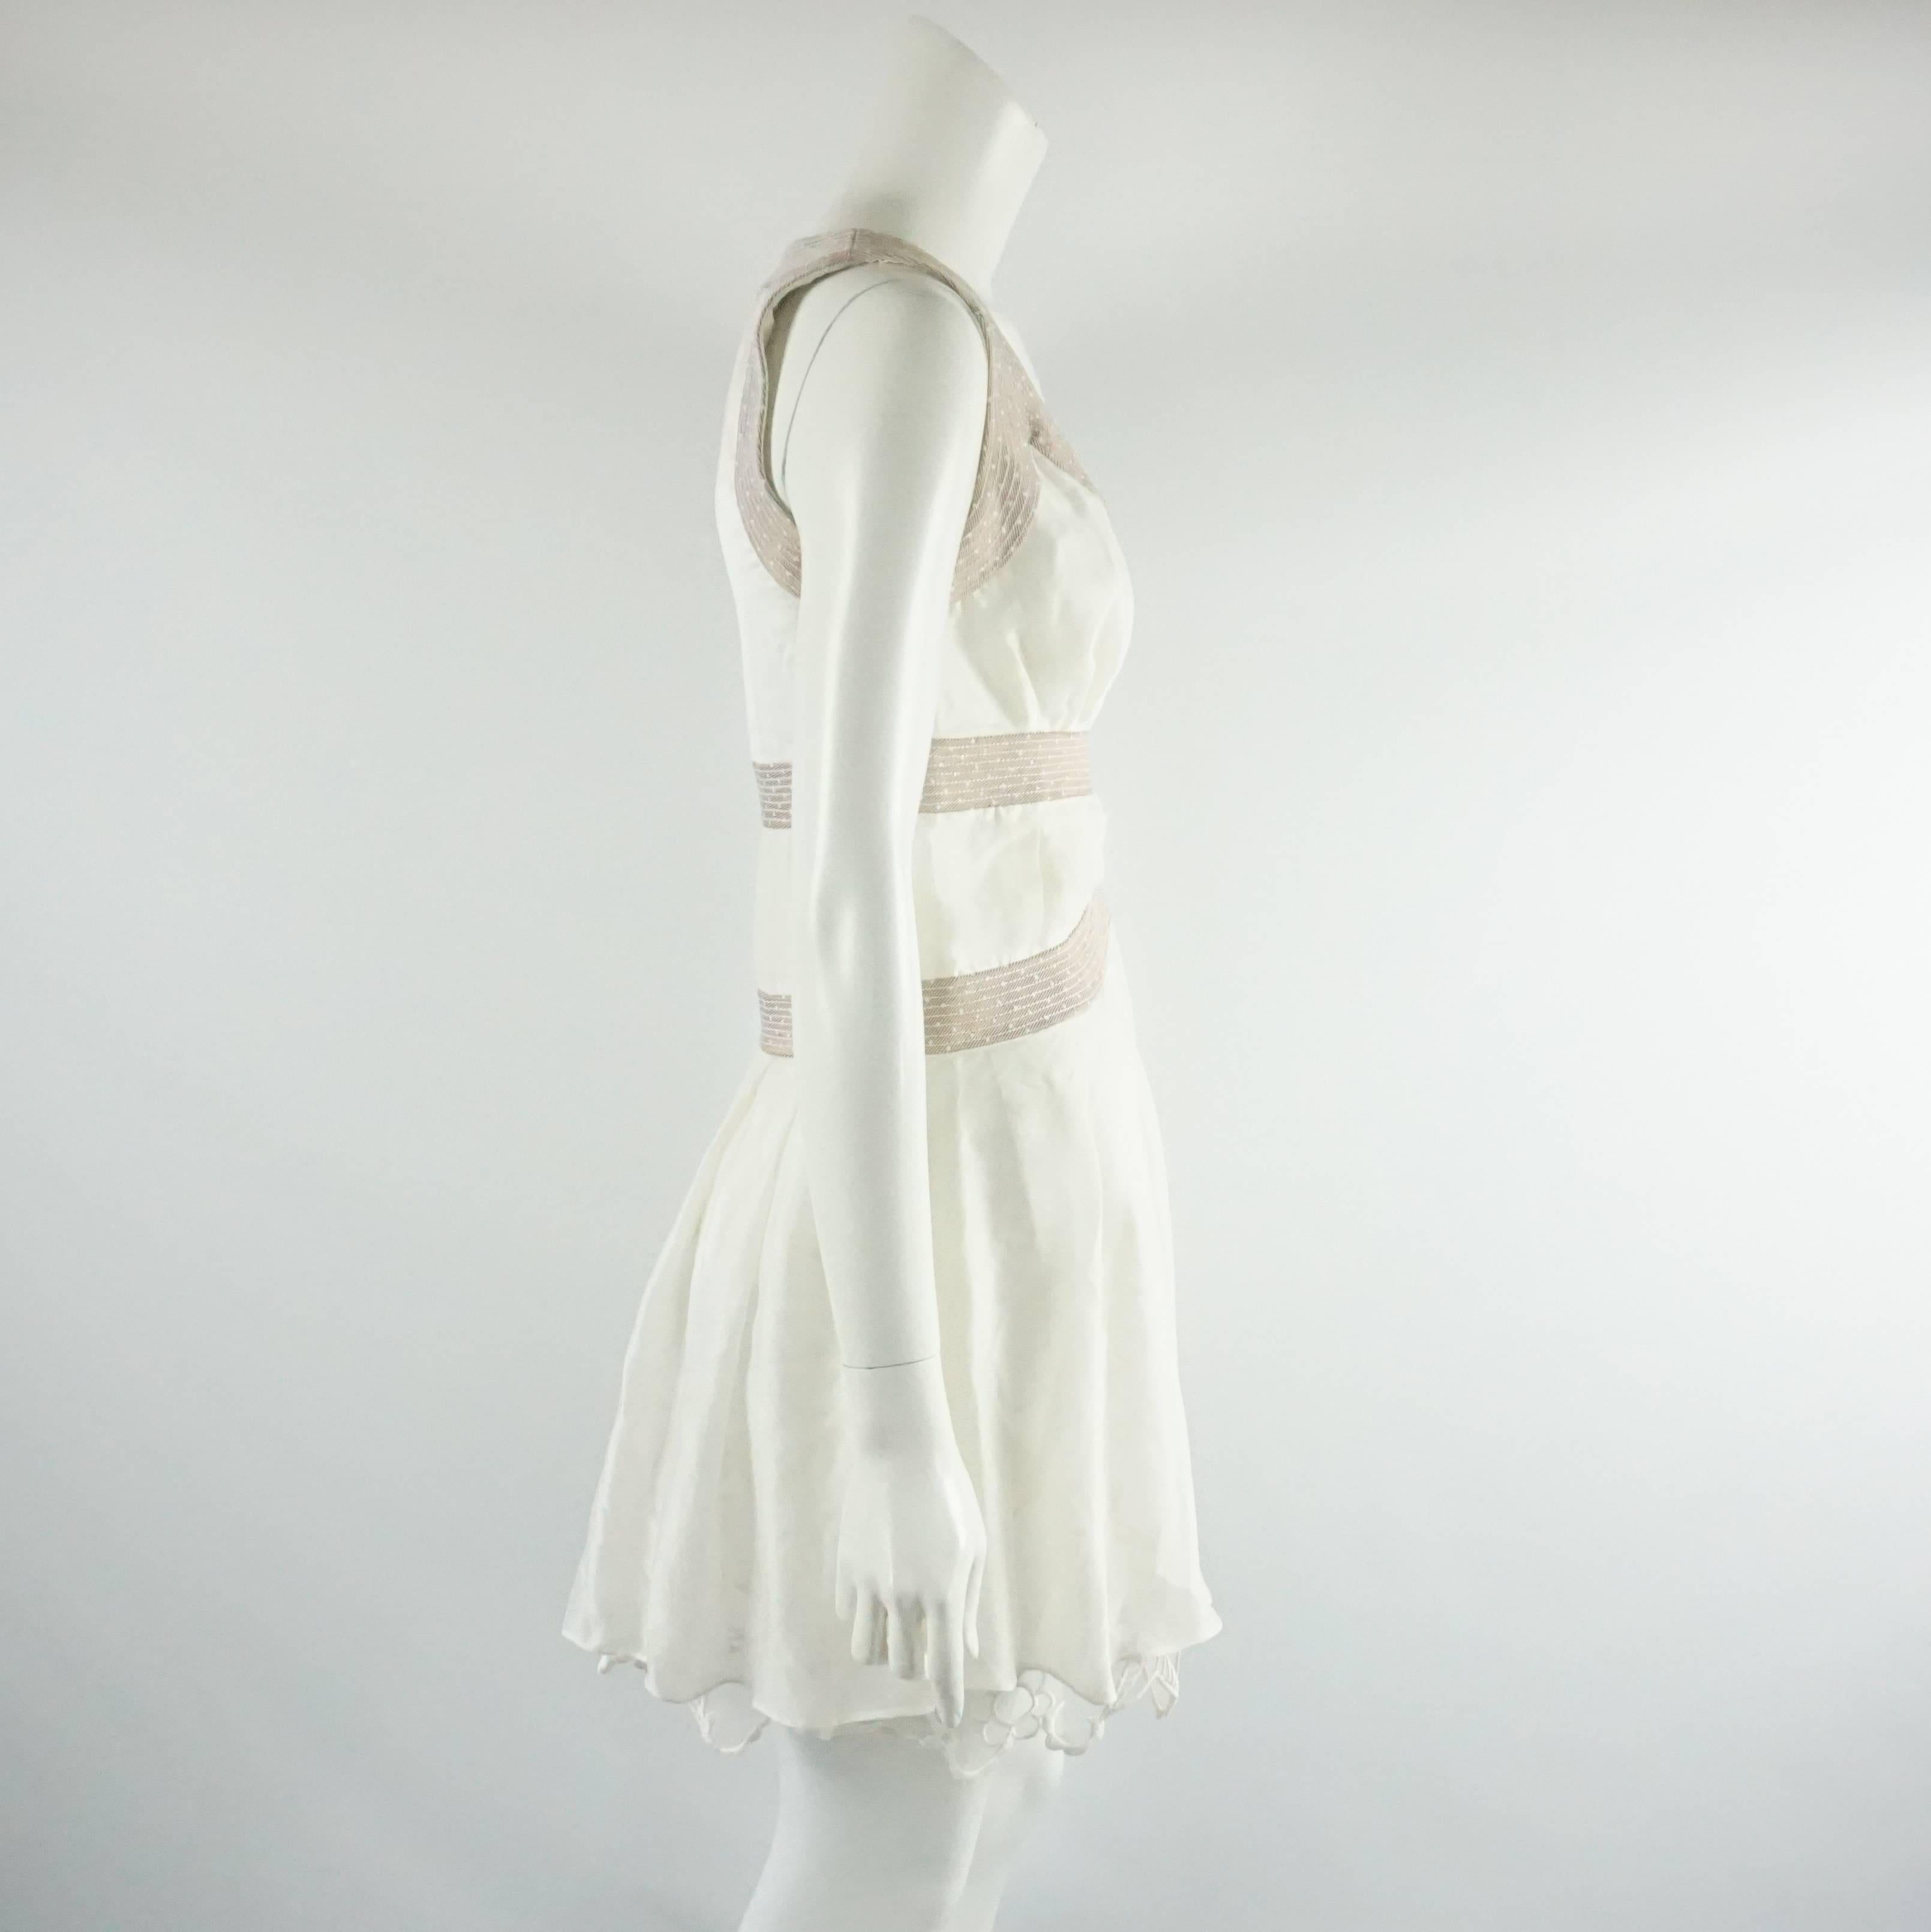 This Nina Ricci Runway ivory dress from the Spring 2006 Collection was look 21 and is the perfect summer dress. The dress is made of a beautiful cotton fabric, has a copper metallic stitched banding design along the neckline, arm hole, just under